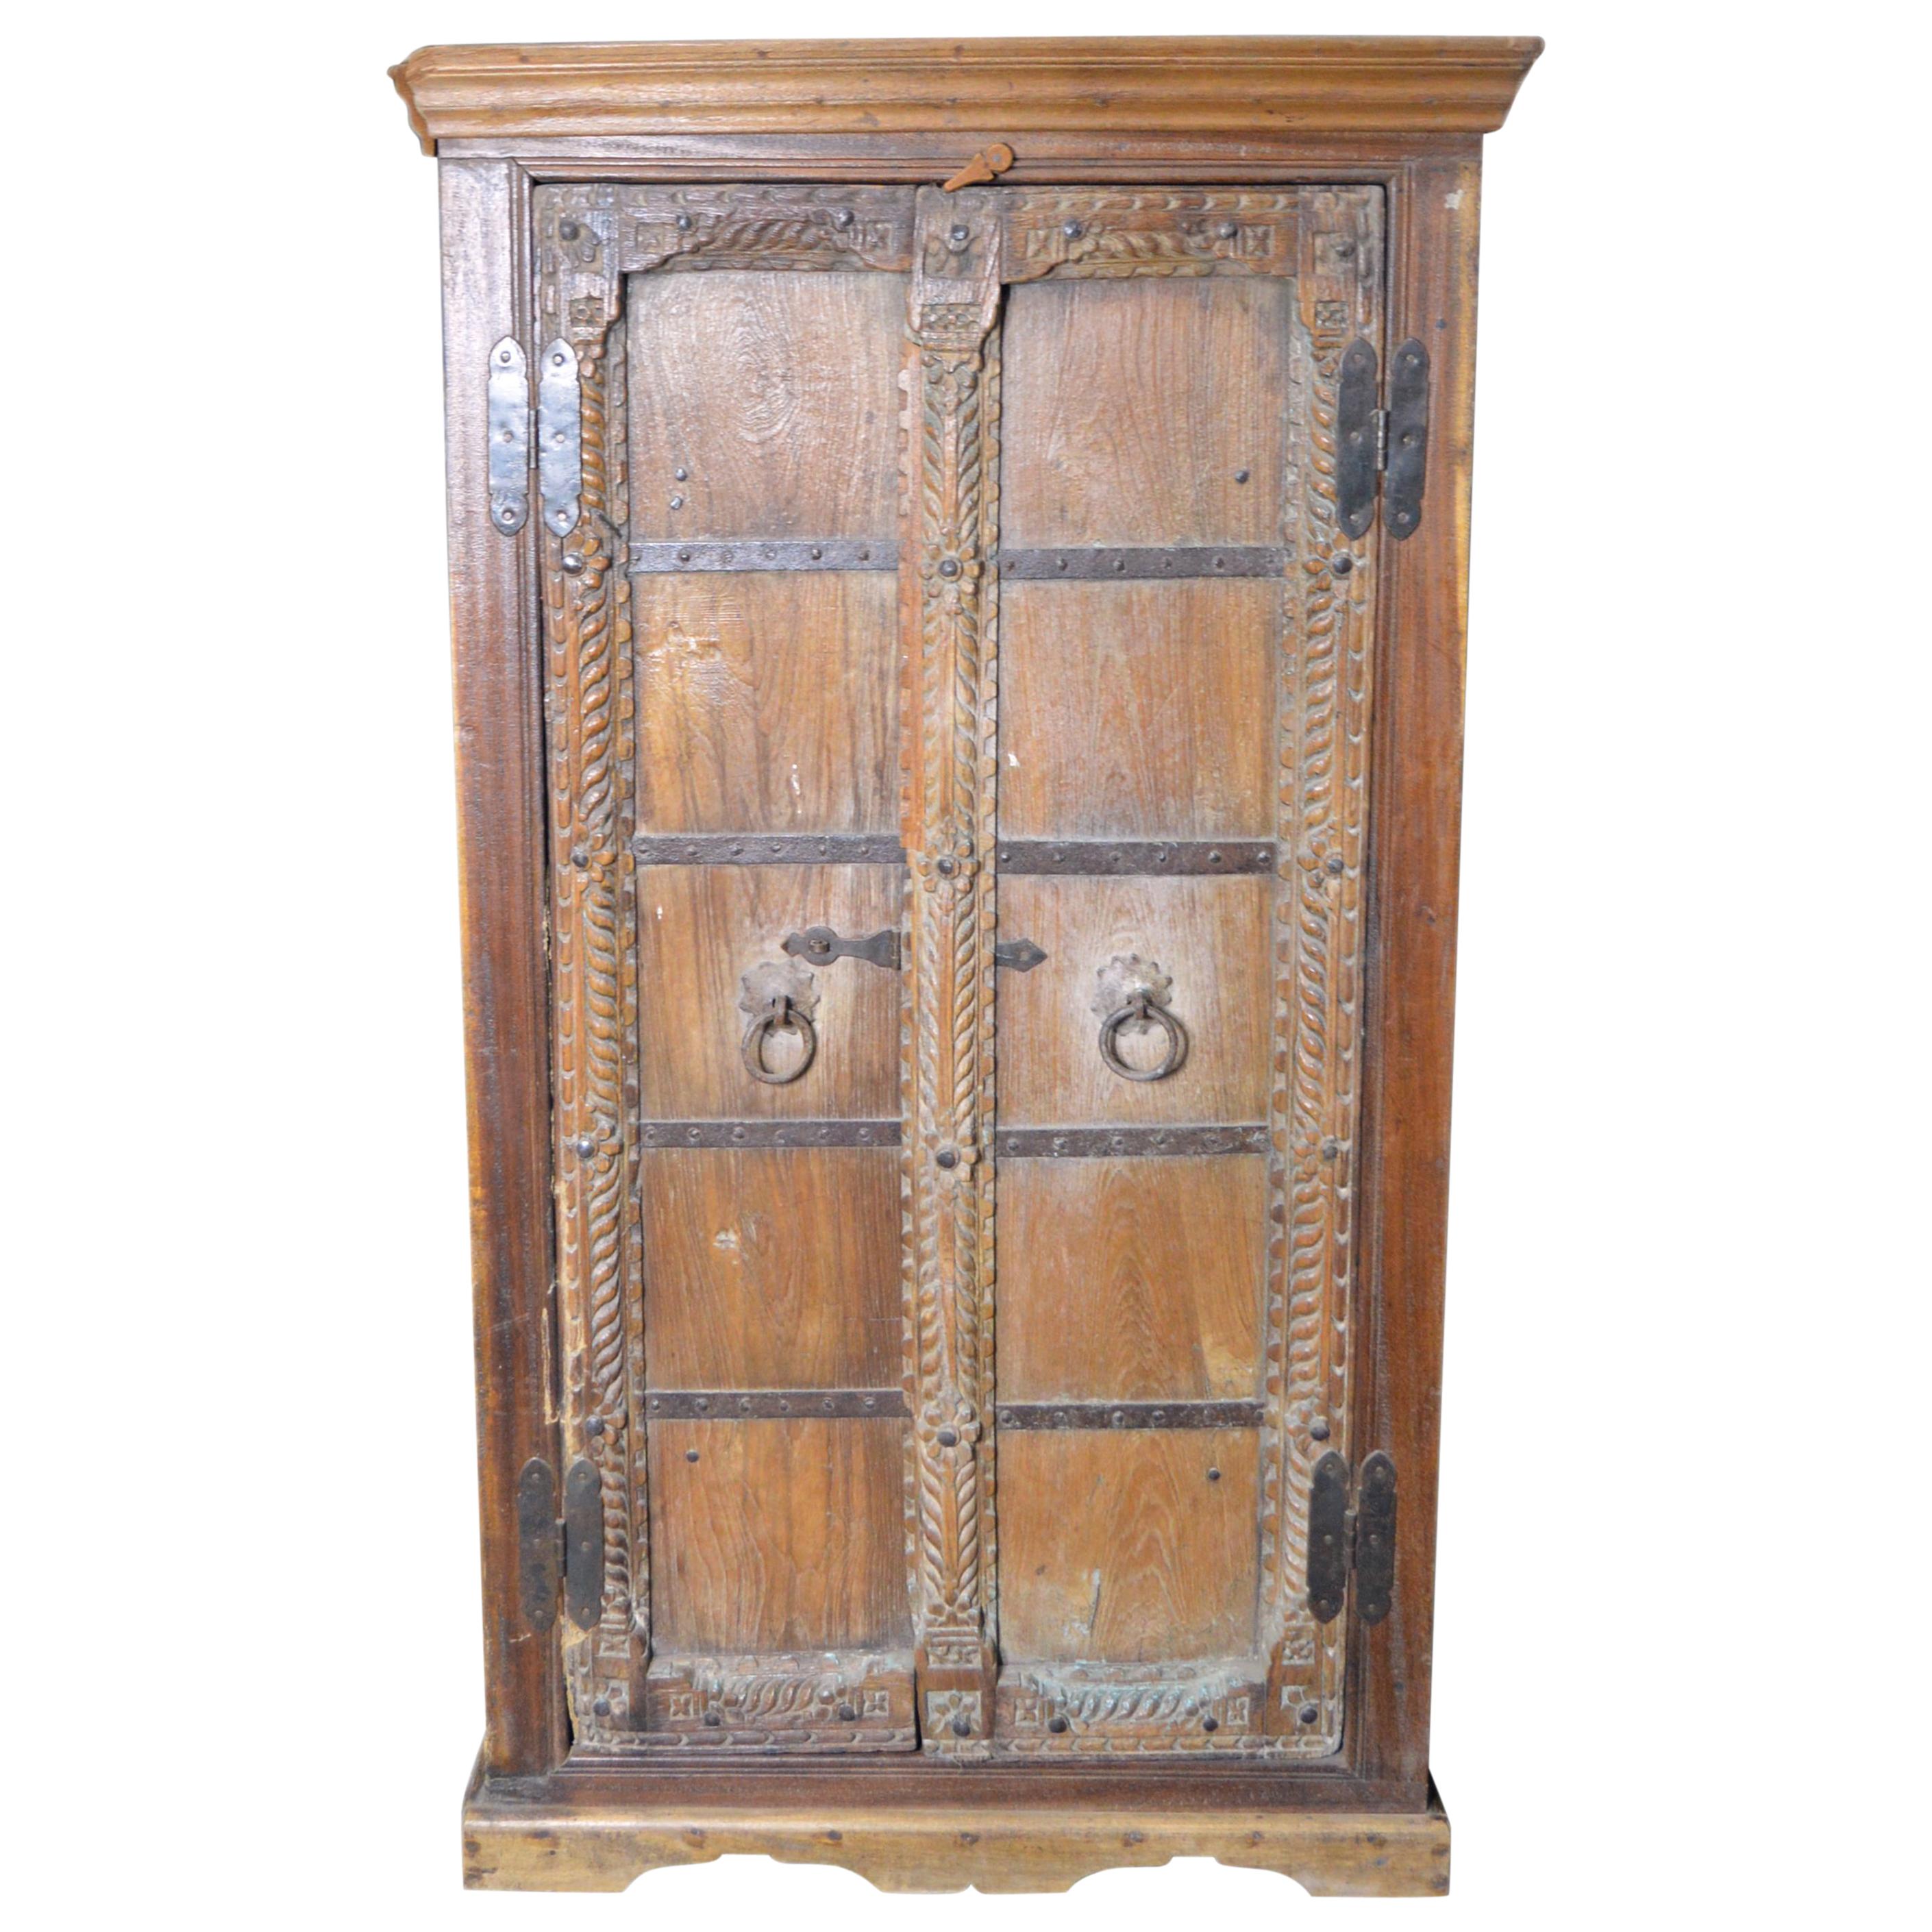 Antique Indian 19th Century Armoire with Metal Braces and Hand-Carved Decor